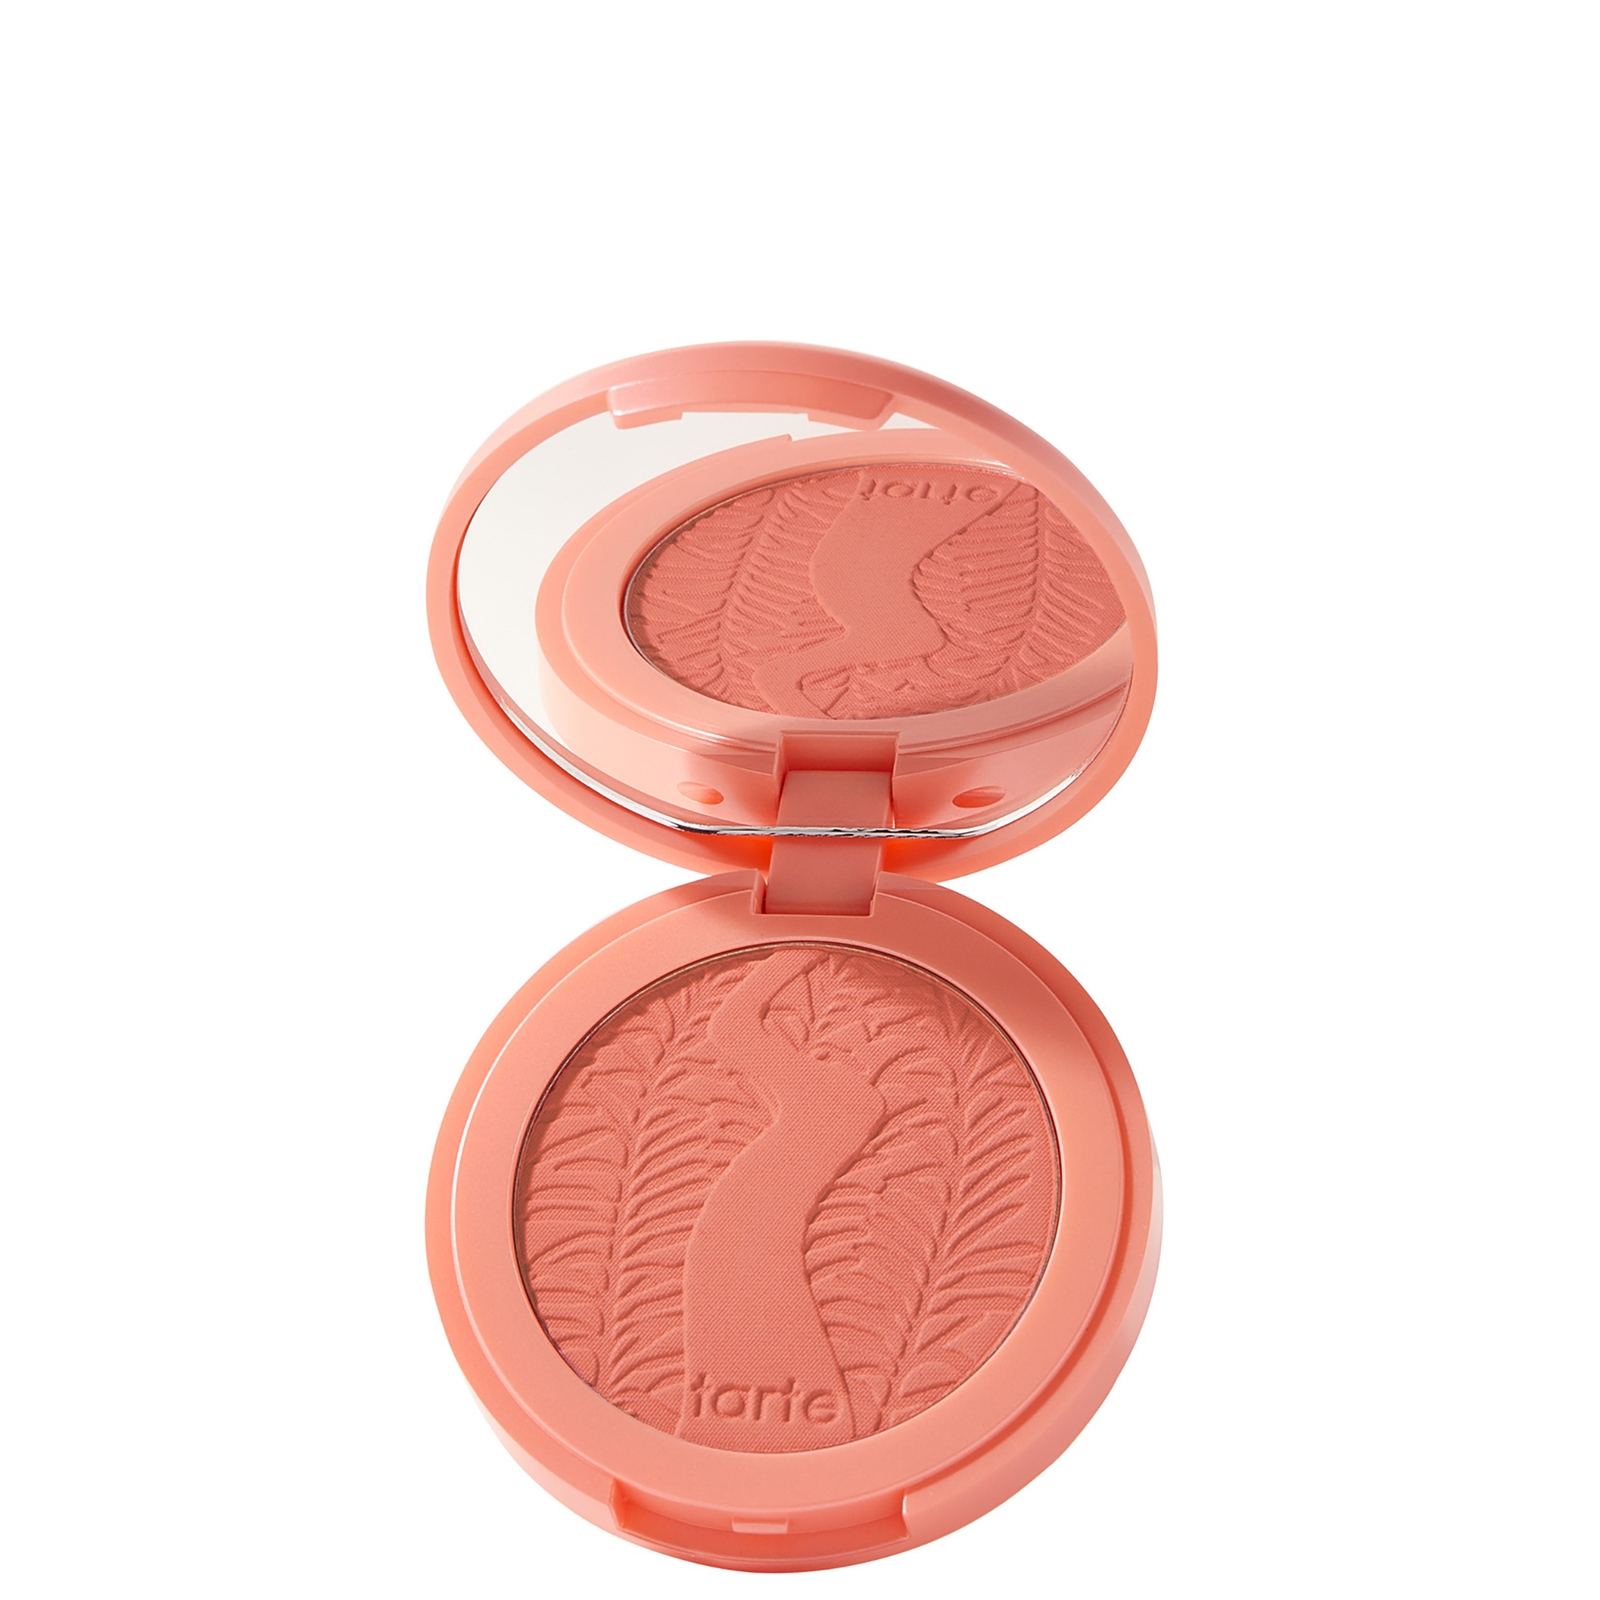 Tarte Amazonian Clay 12-hour Blush (various Shades) In White